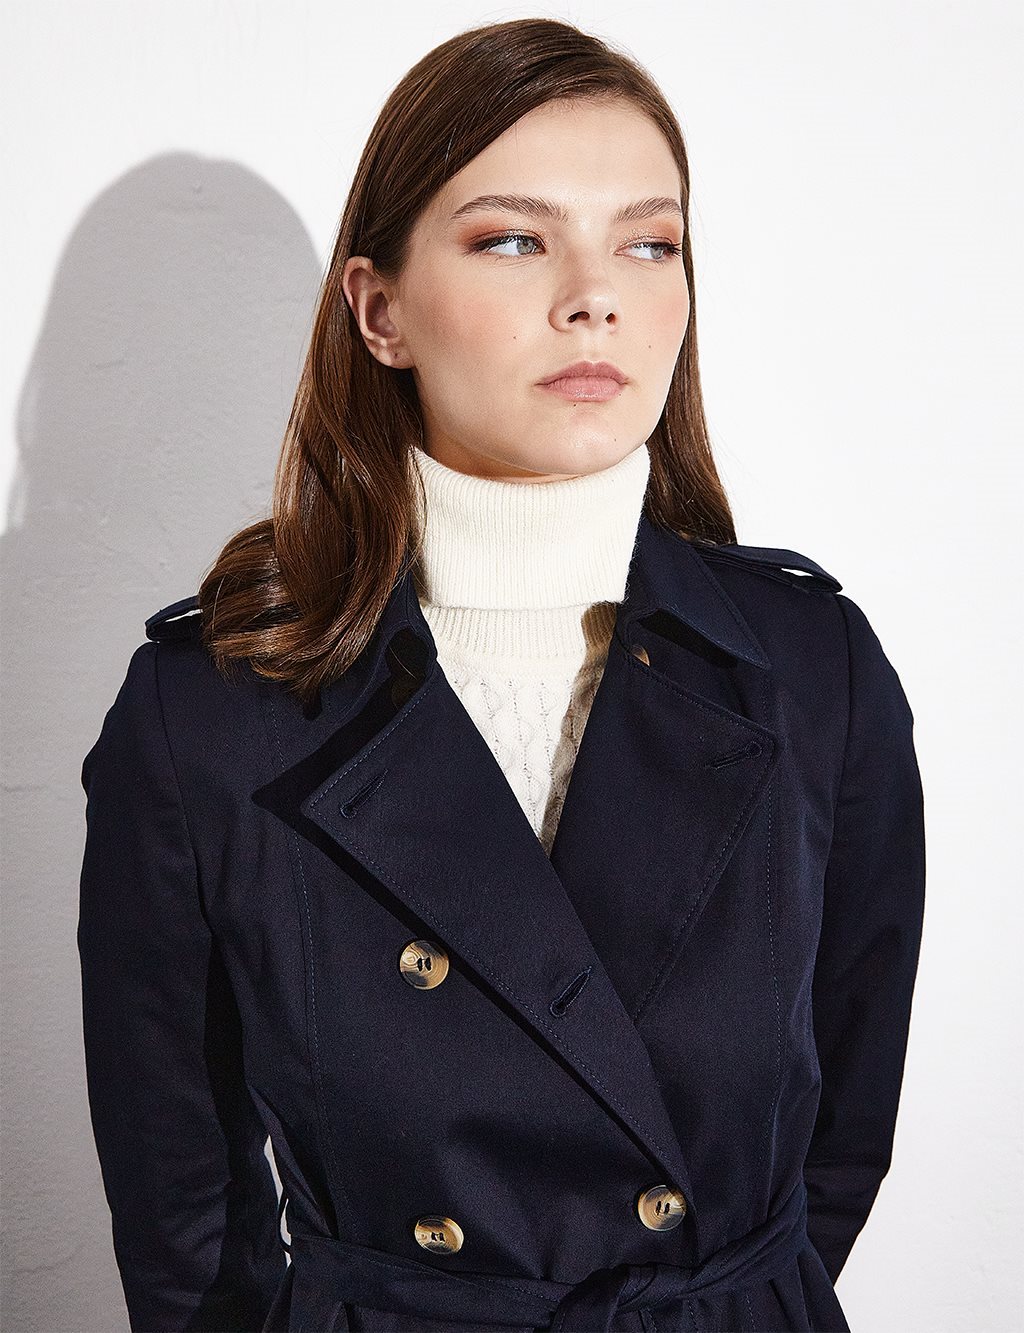 Bone Buttoned Classic Trench Coat Navy Blue